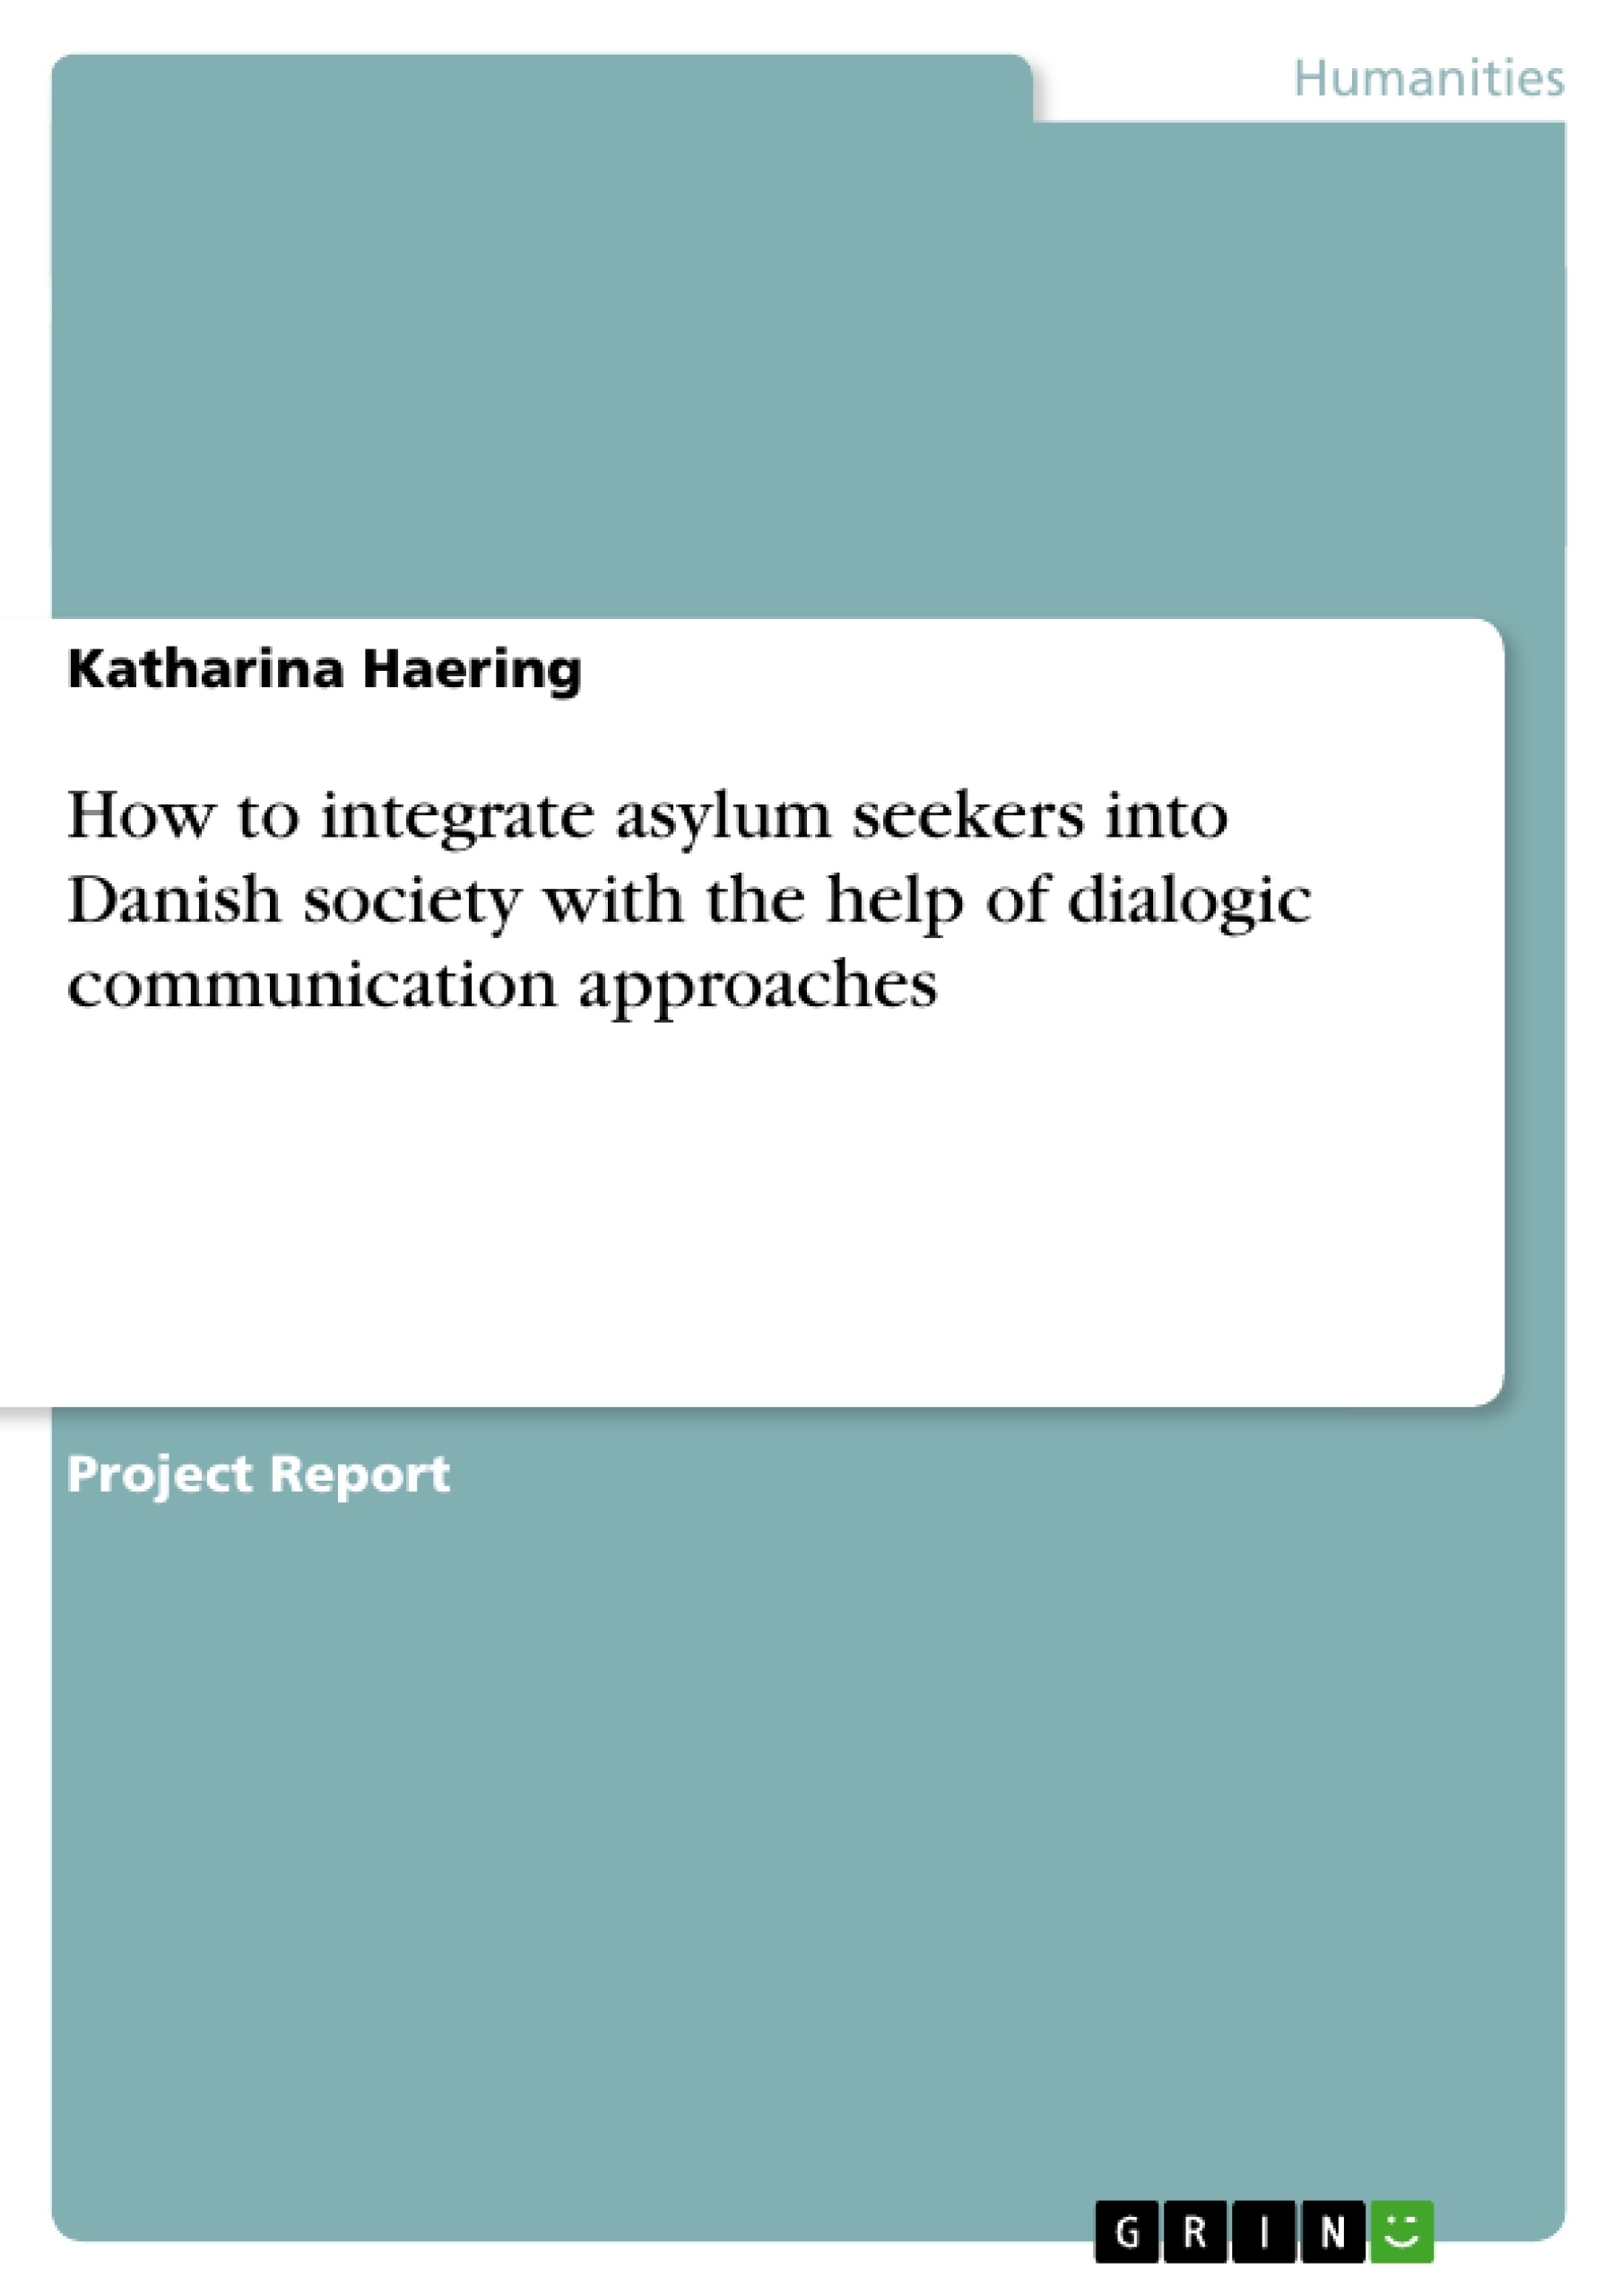 Titel: How to integrate asylum seekers into Danish society with the help of dialogic communication approaches